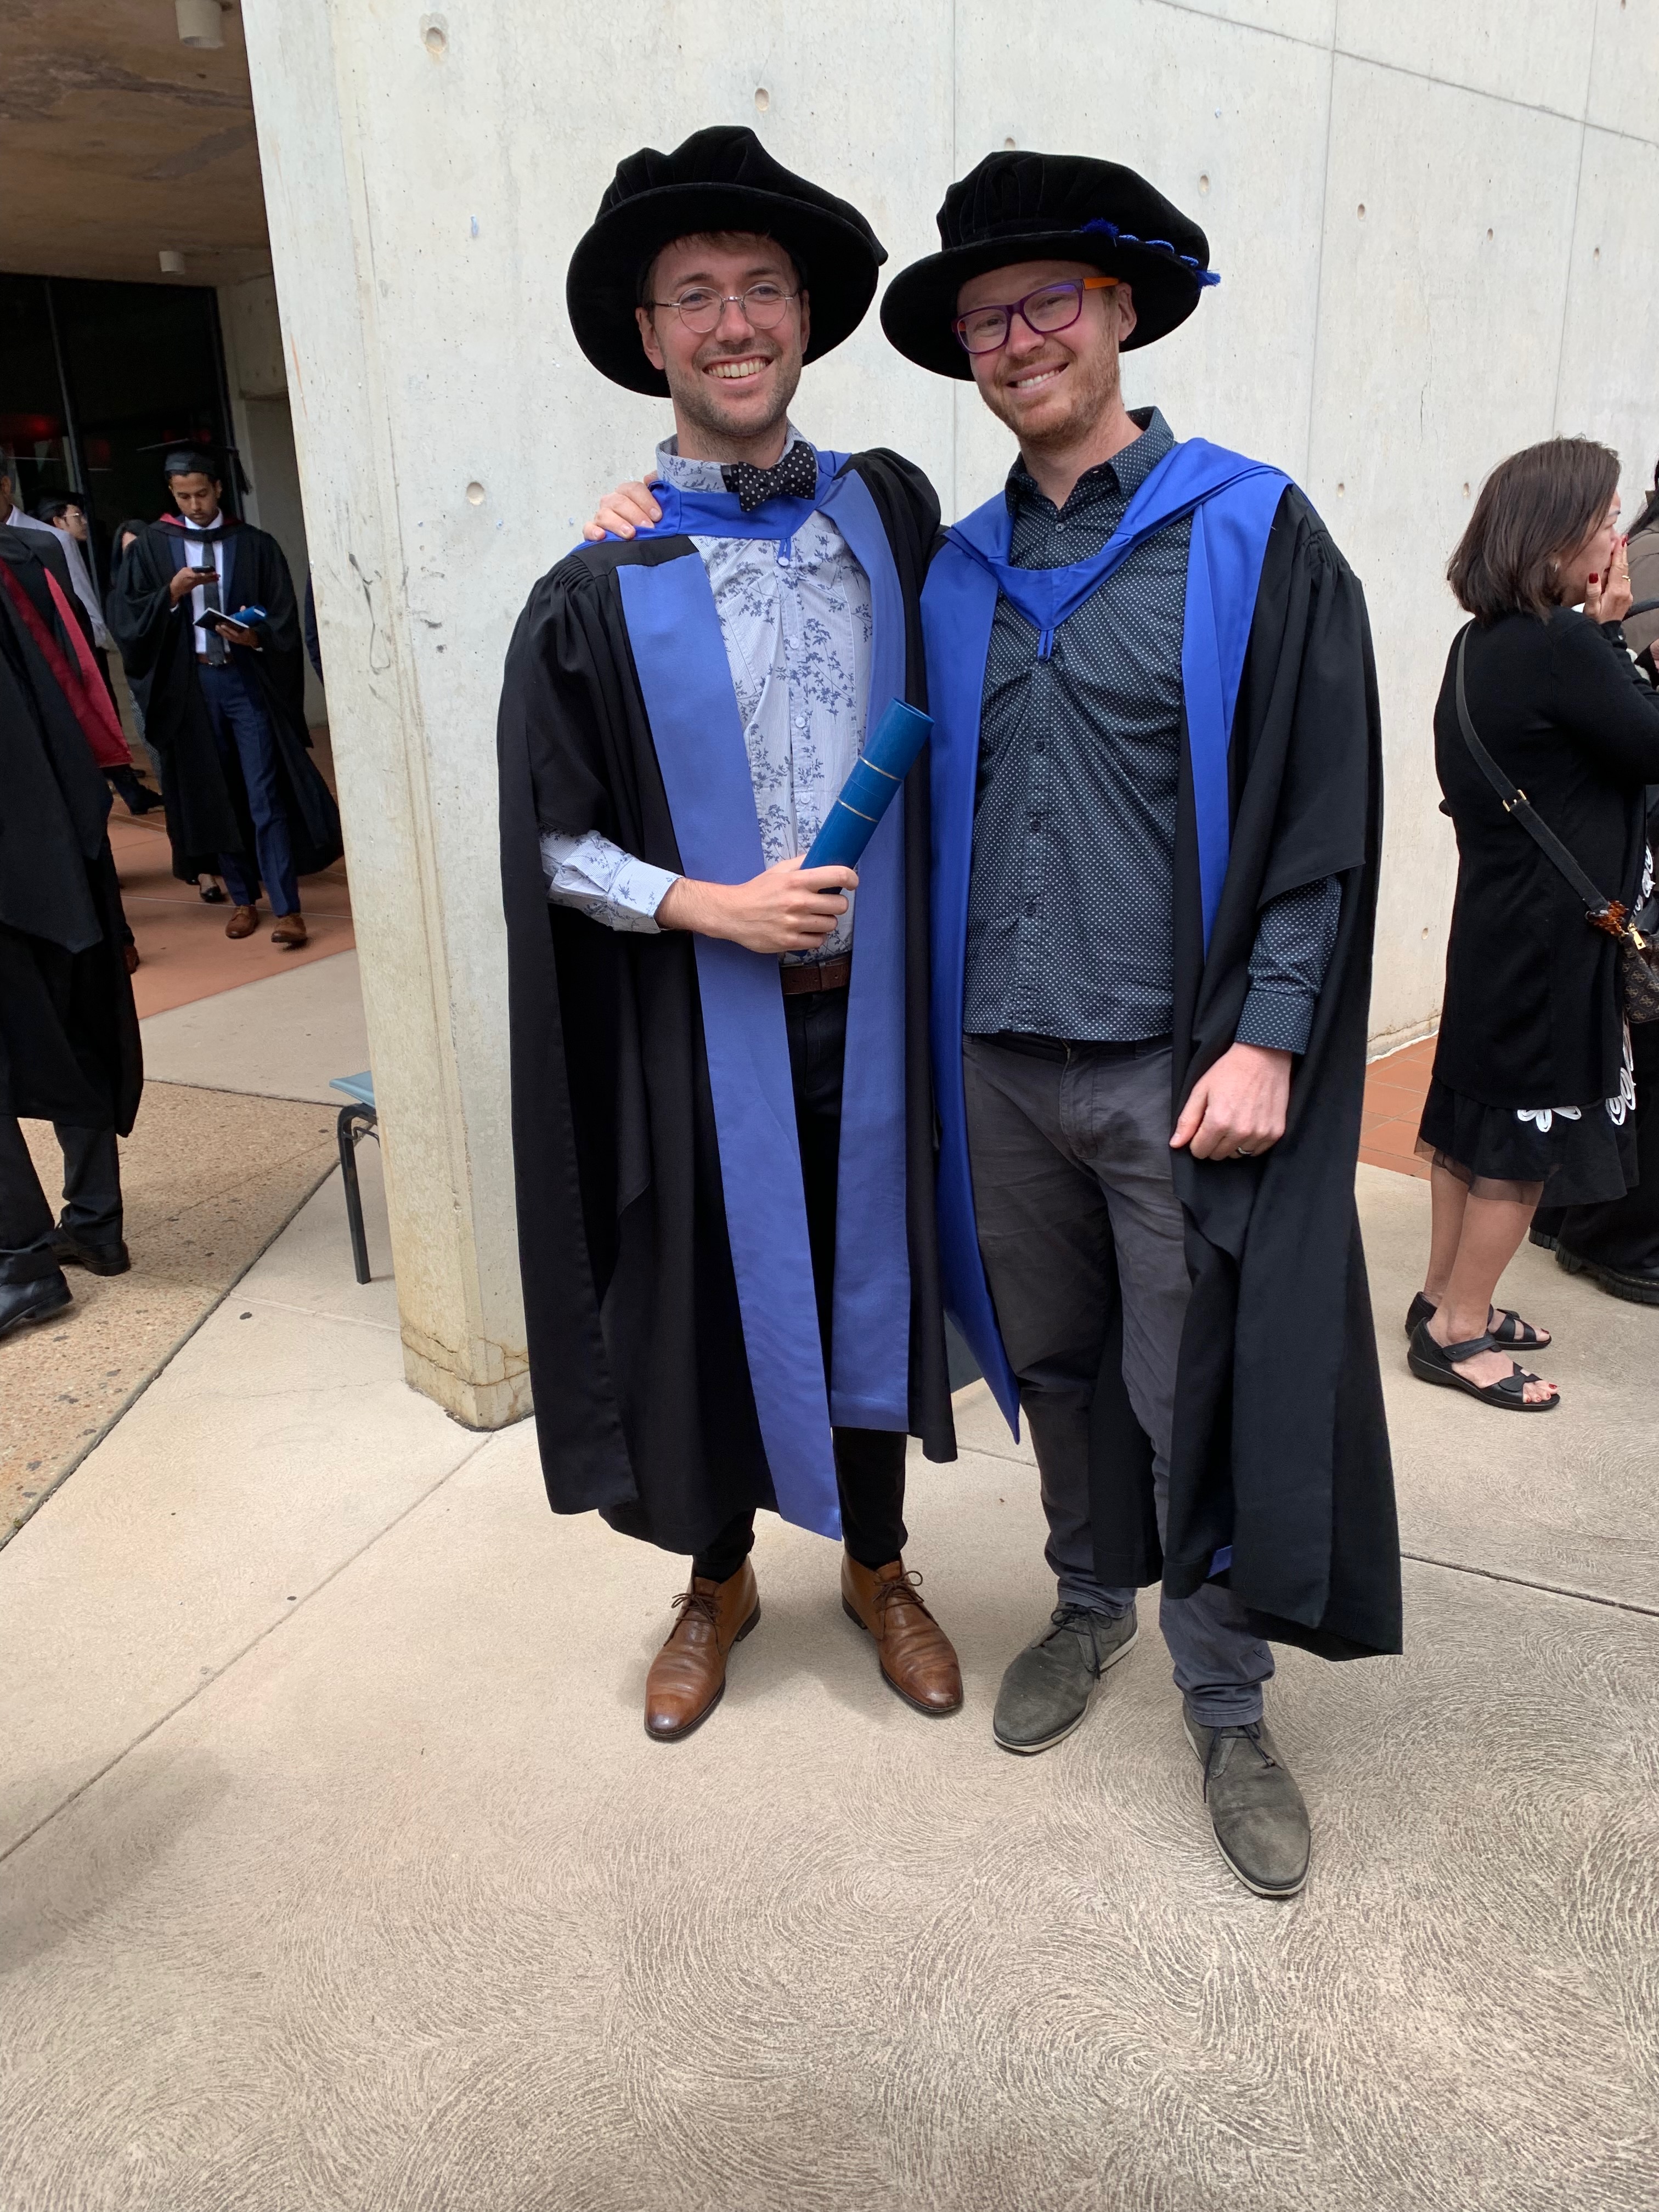 Ben and Kieran in full academic dress at the ANU graduation ceremony in December 2022